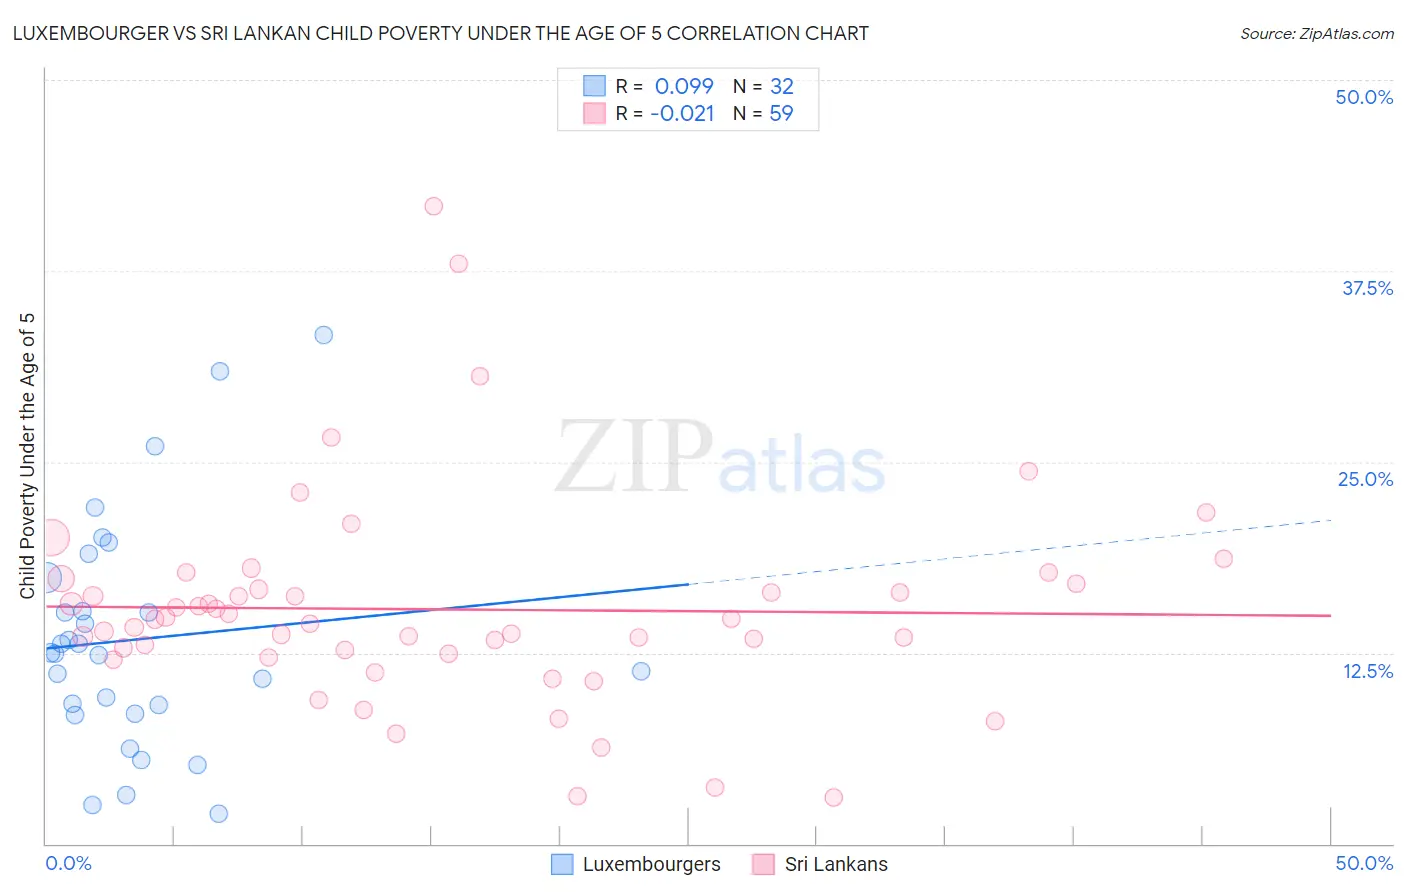 Luxembourger vs Sri Lankan Child Poverty Under the Age of 5